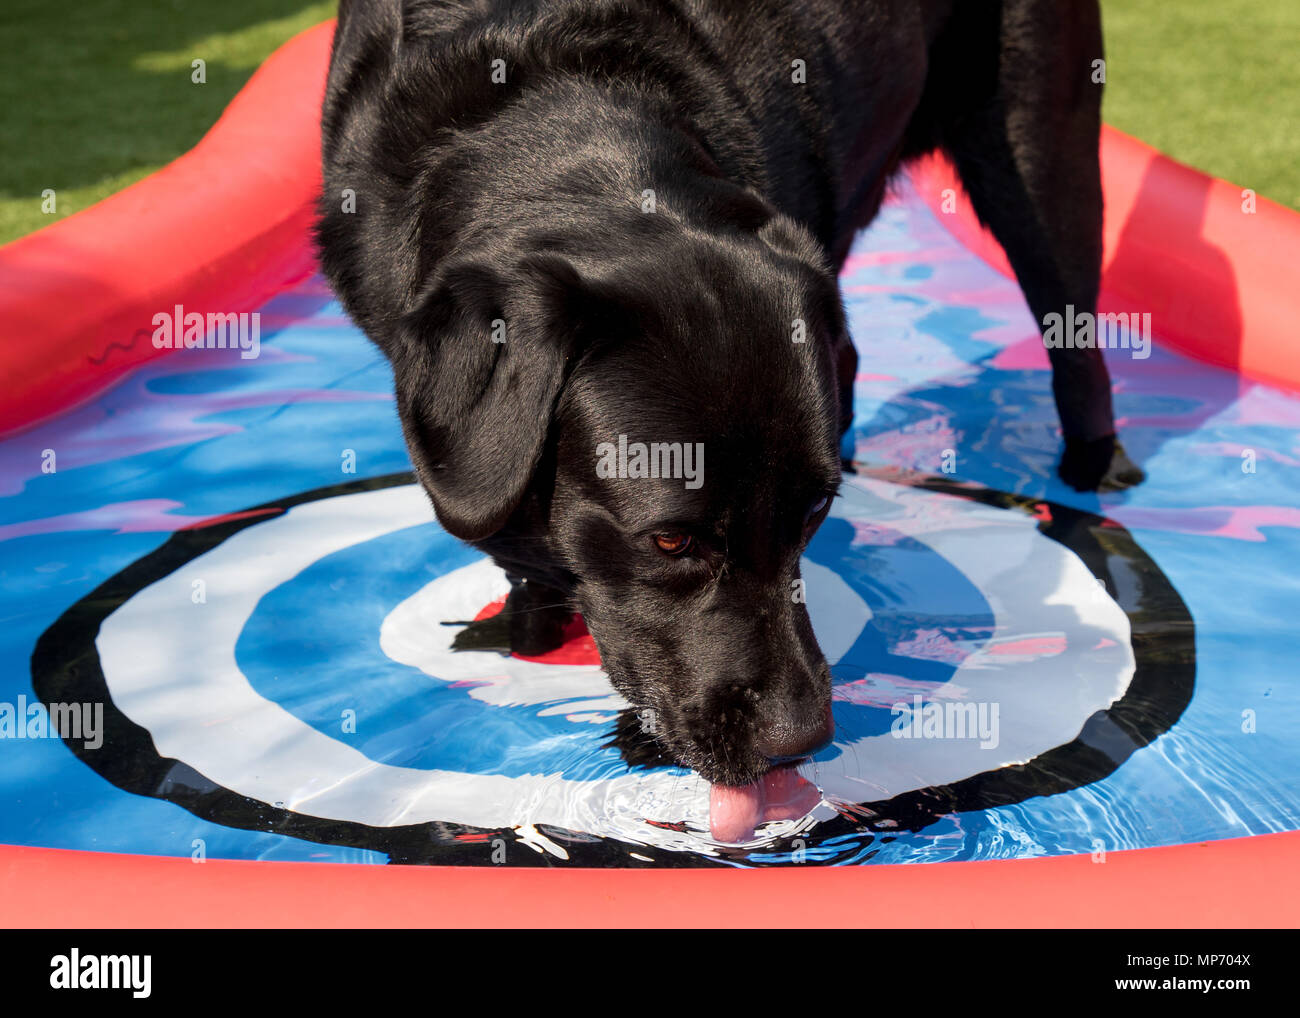 Black Labrador plays in a paddling pool in a garden / Adult male Labrador in paddling pool Stock Photo